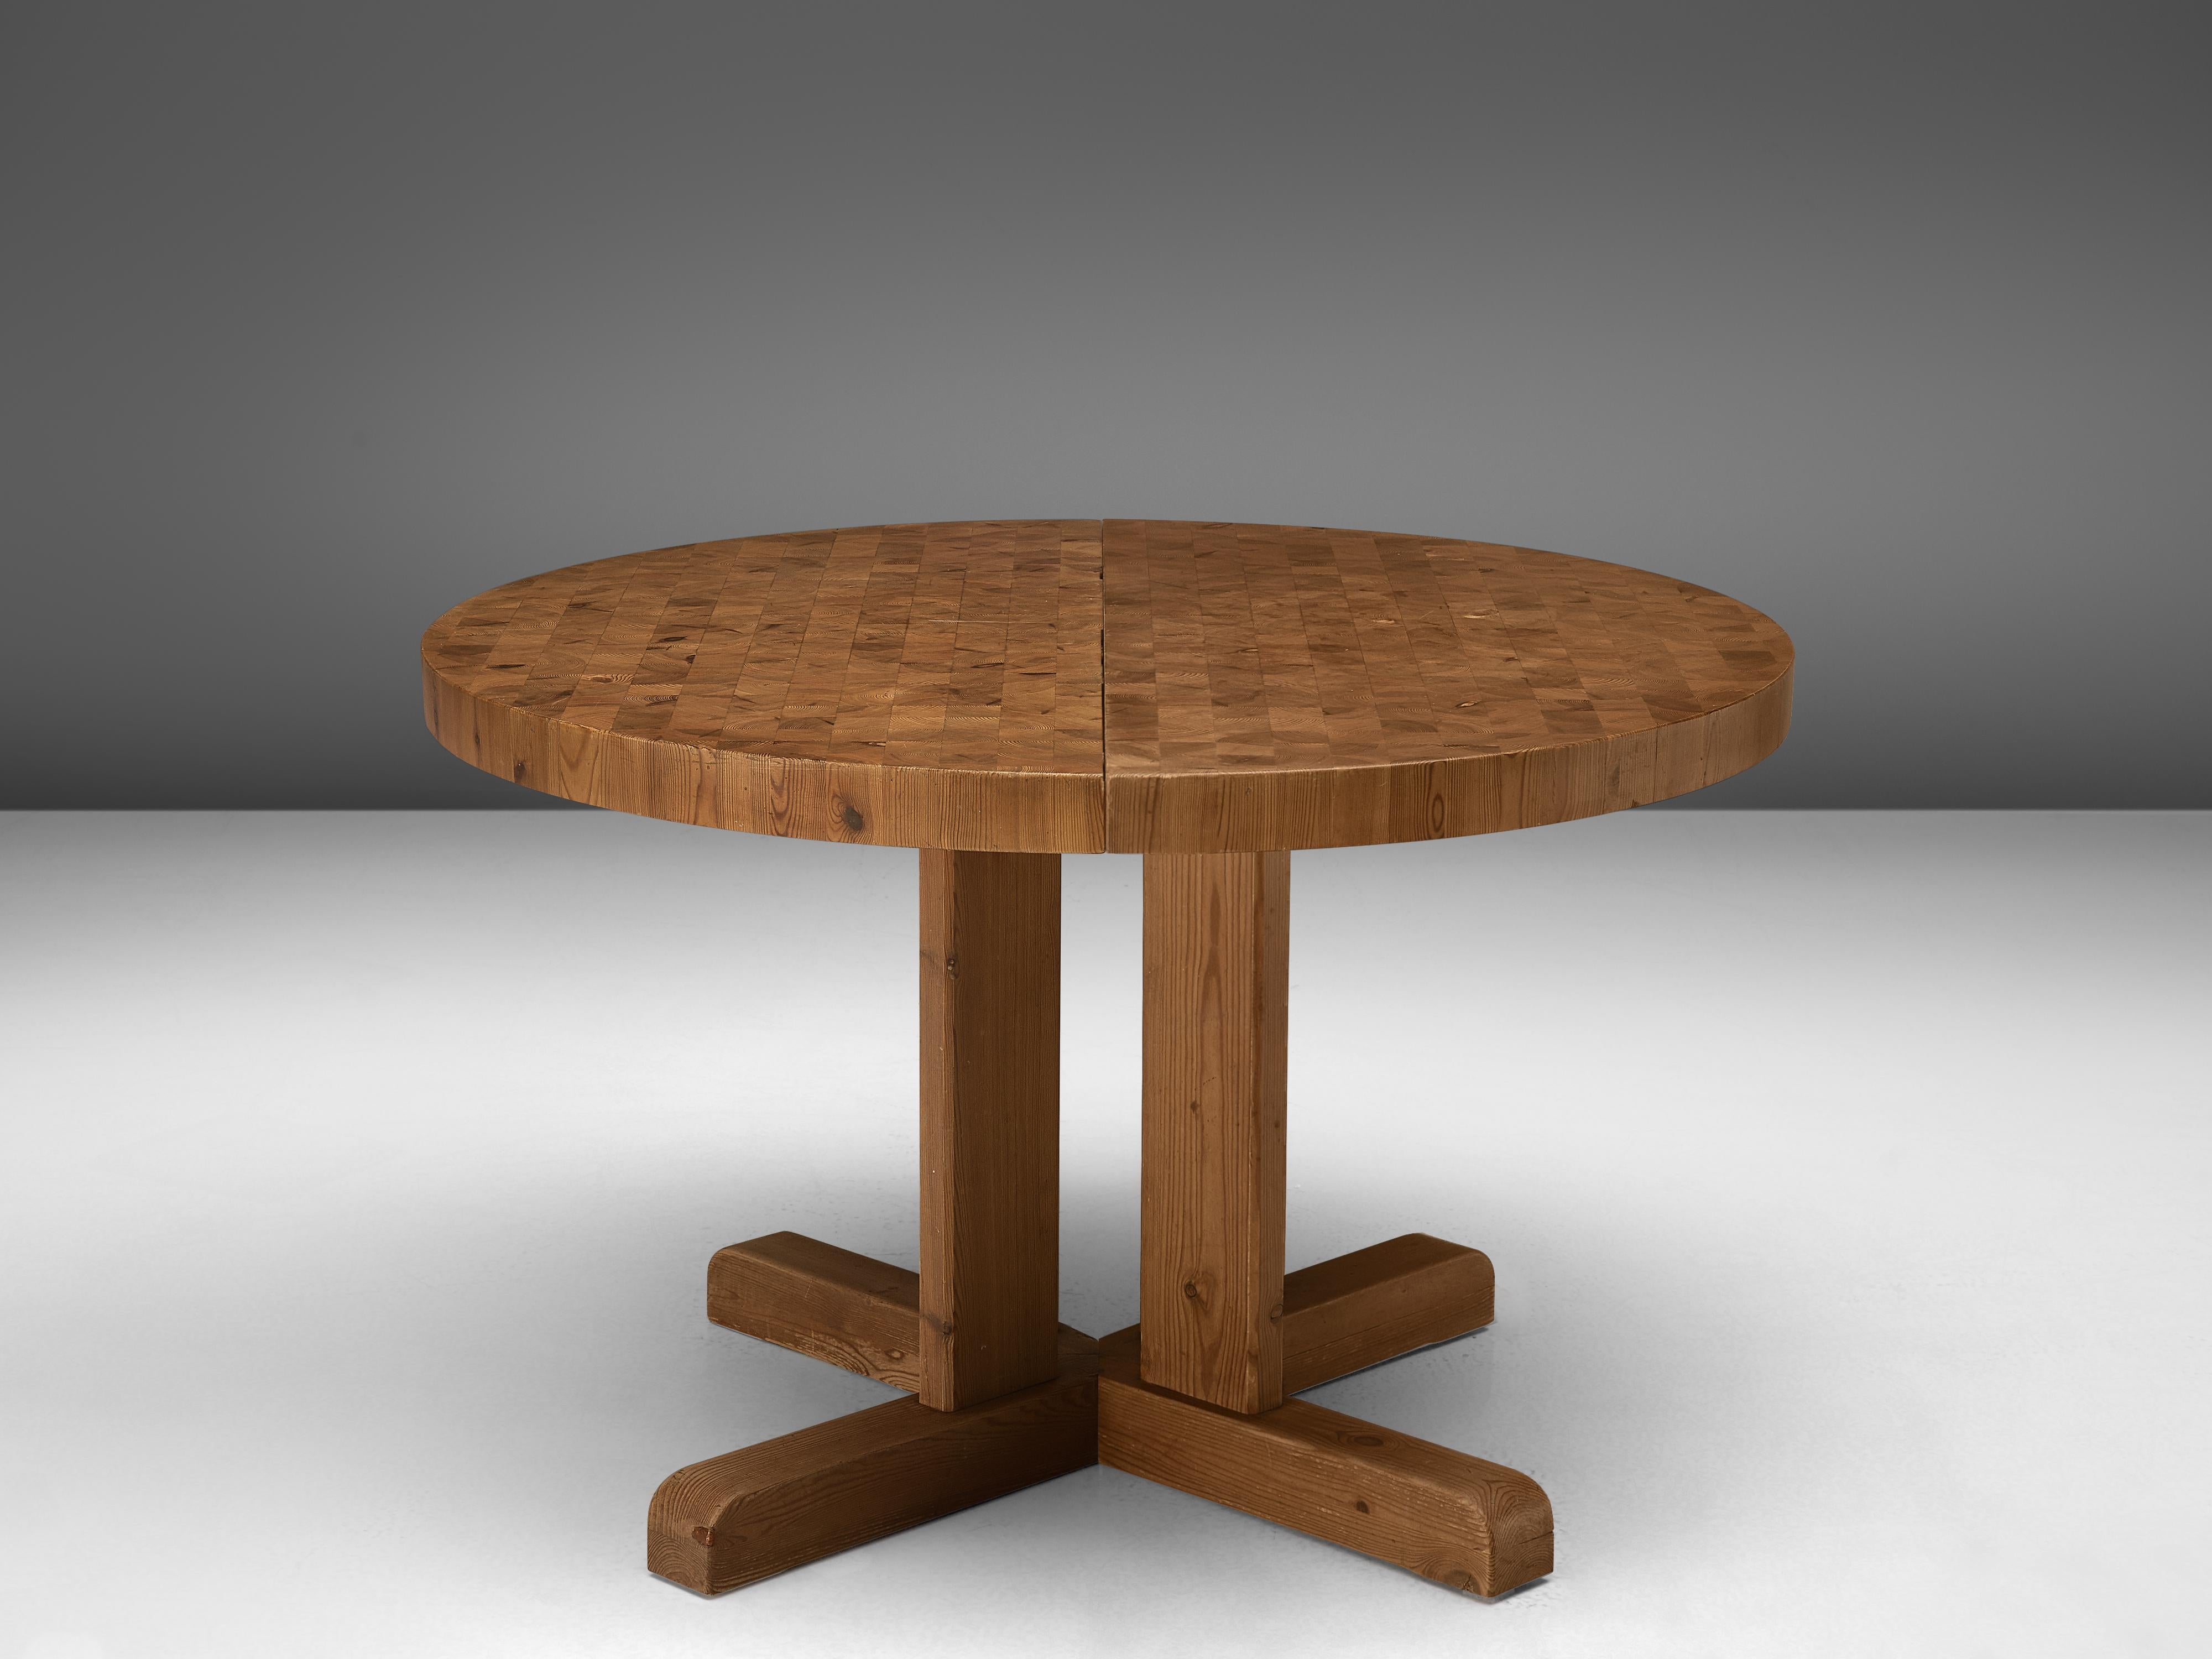 Scandinavian Modern Extendable Danish Dining Table with End-Grain Tabletop